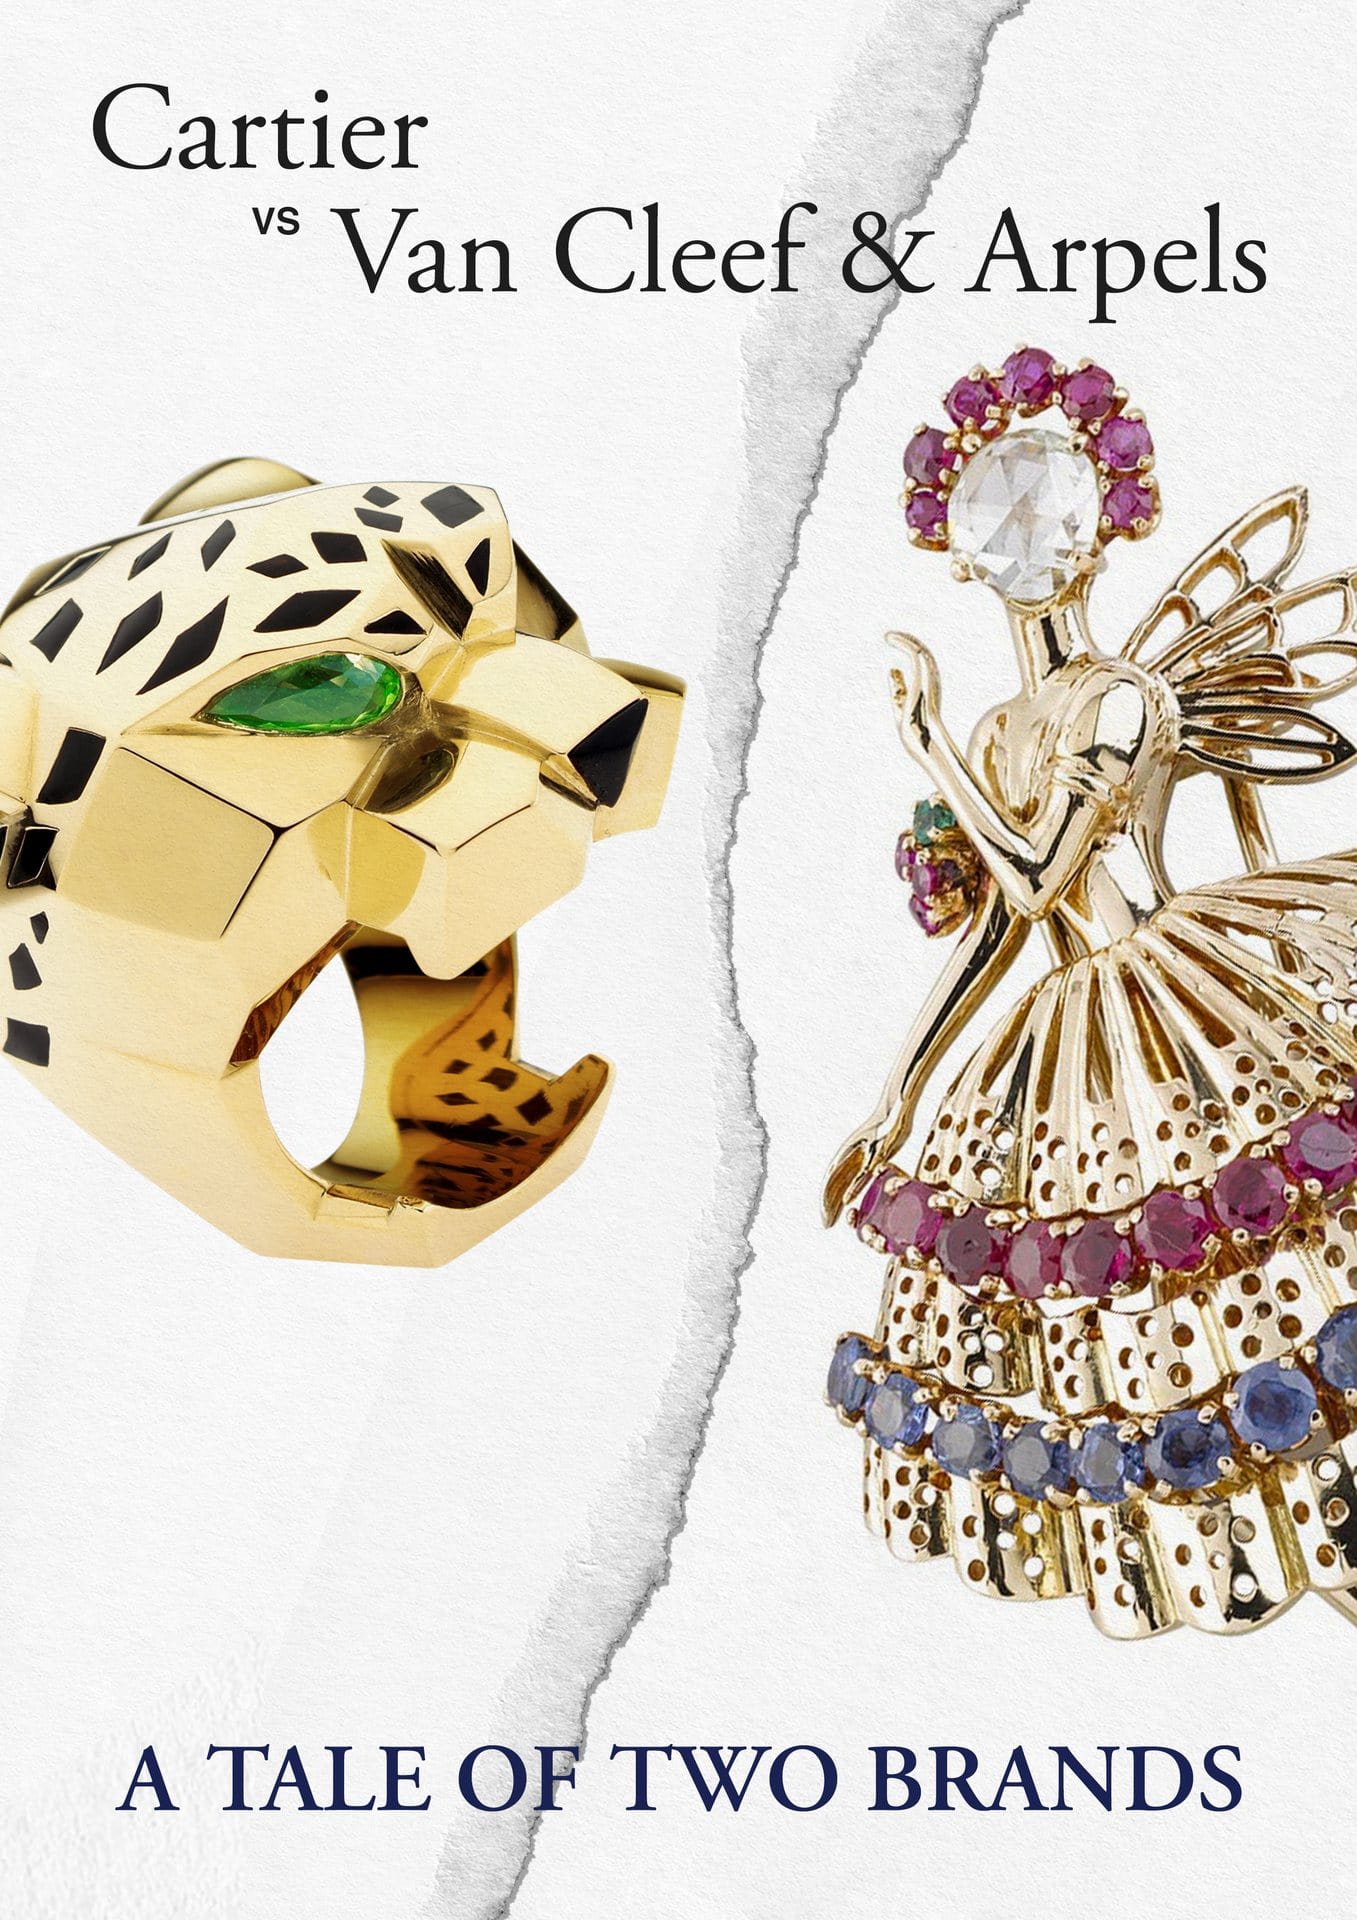 The Richemont series - Episode Two: Cartier vs Van Cleef & Arpels, a tale of two brands